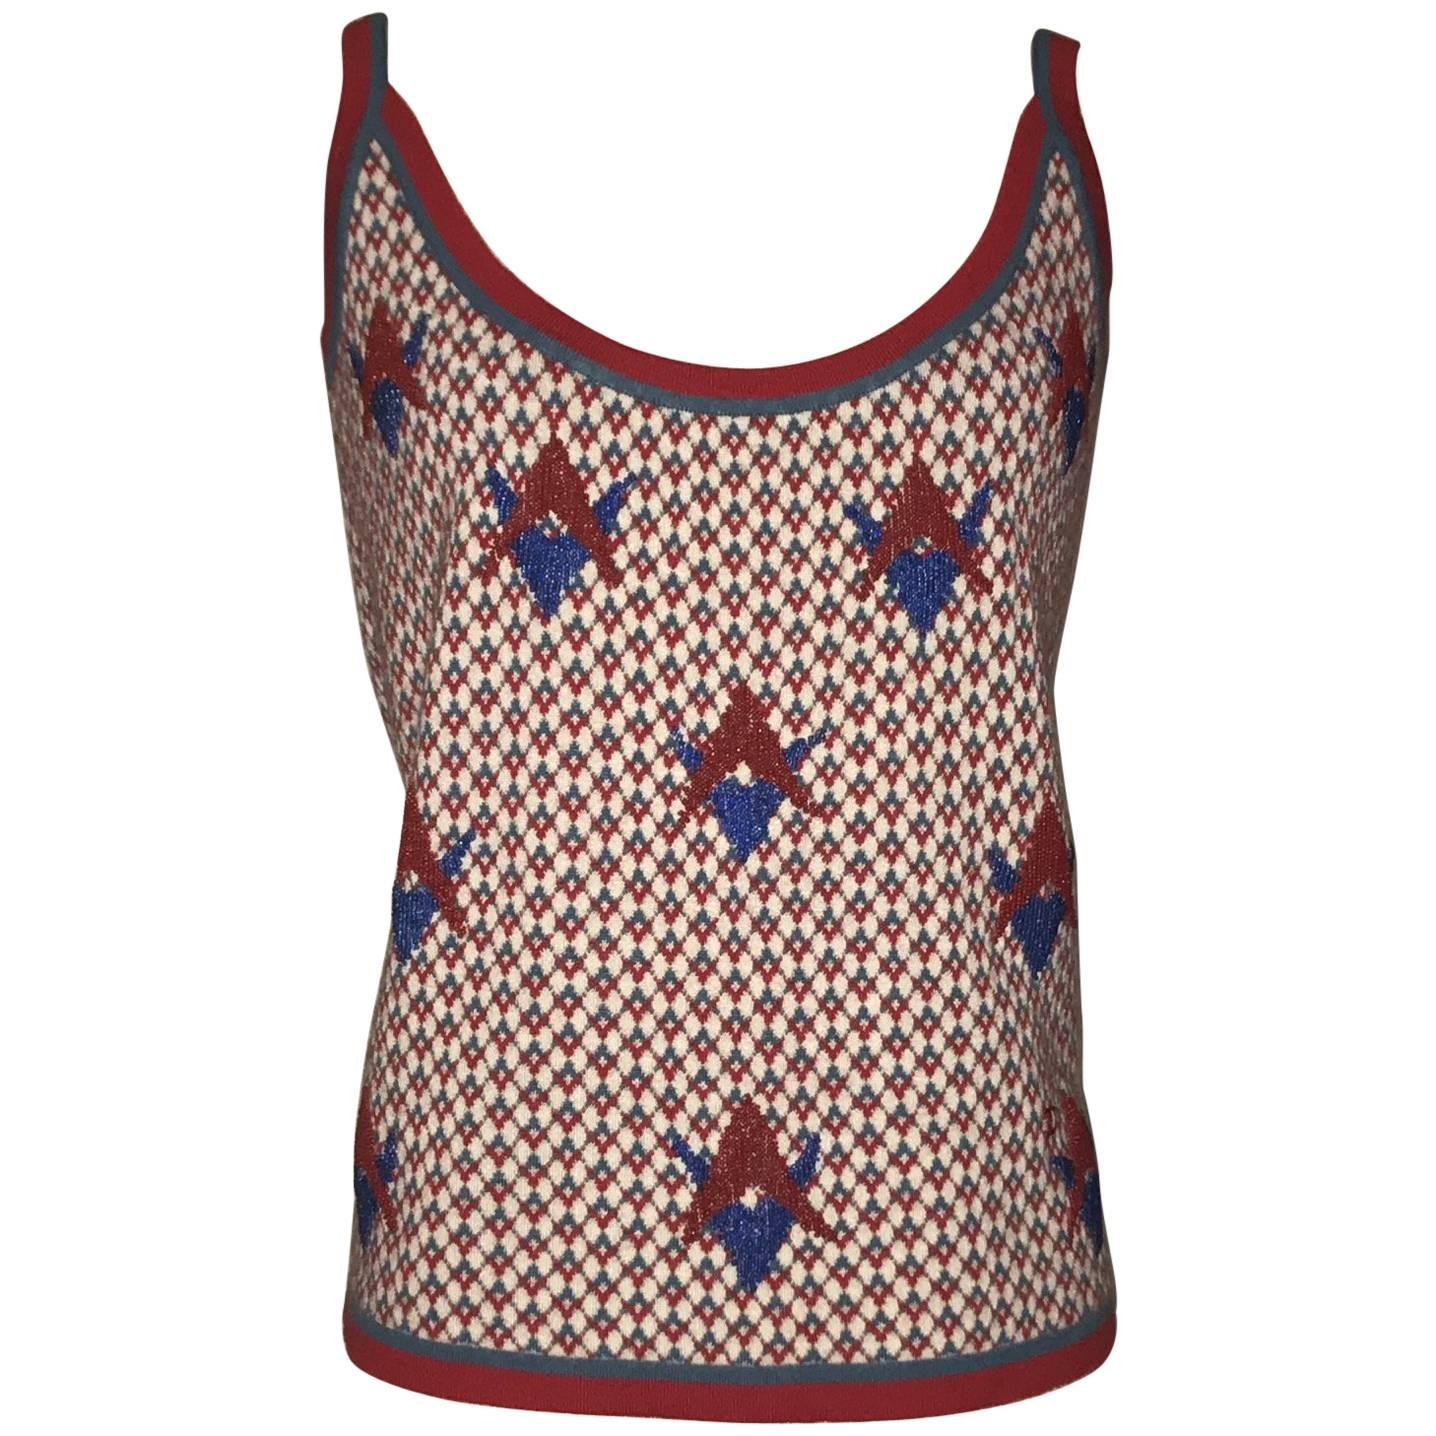 Chanel Red and Blue Beaded Cashmere Tank Top Sweater 